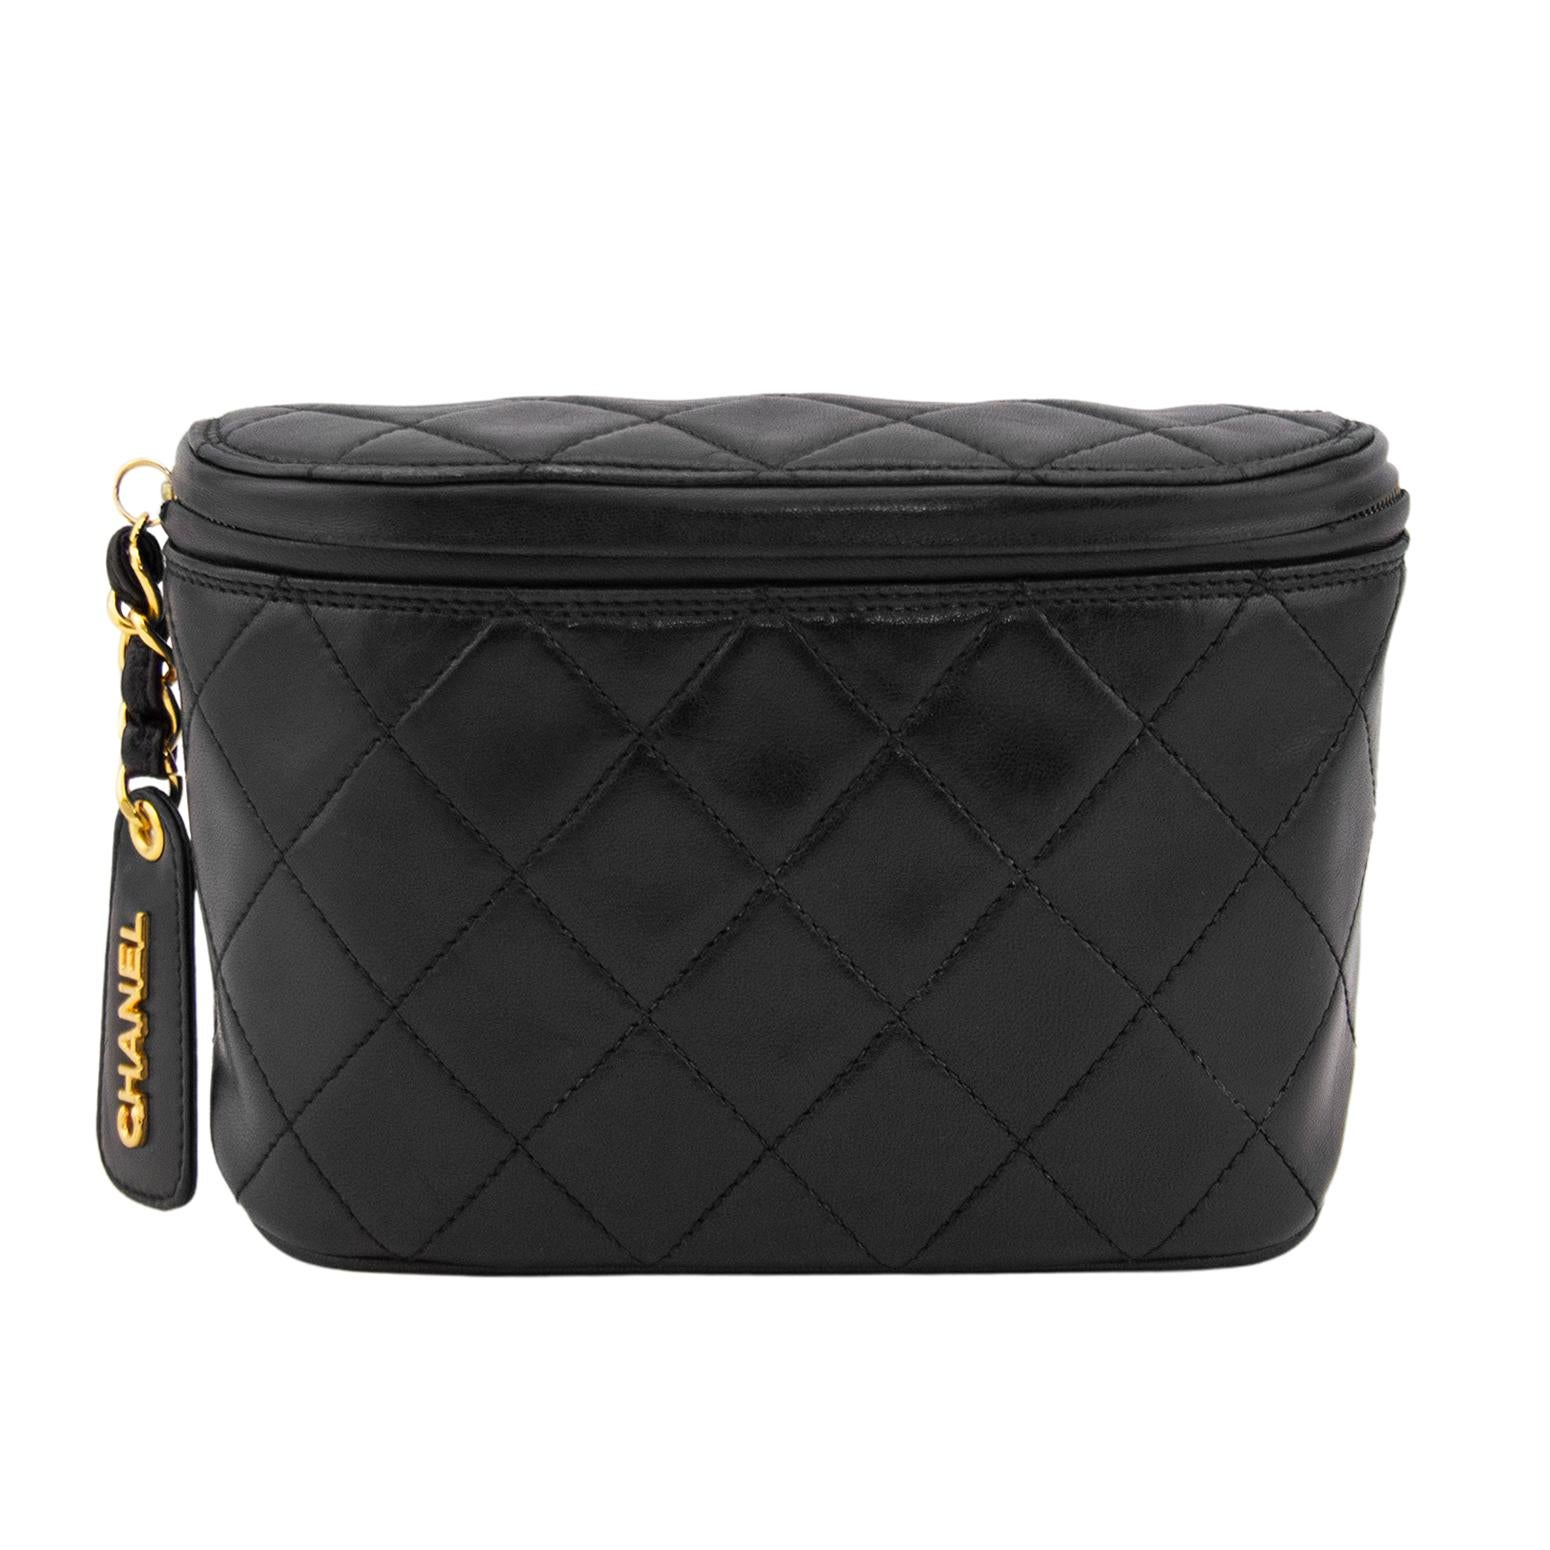 Beautiful 1990s Chanel waist bag with all the classic and iconic Chanel features. Supple black quilted lambskin leather with a zipper across the front. Zipper features a black leather and gold tone metal chain zipper tab with an oversized black